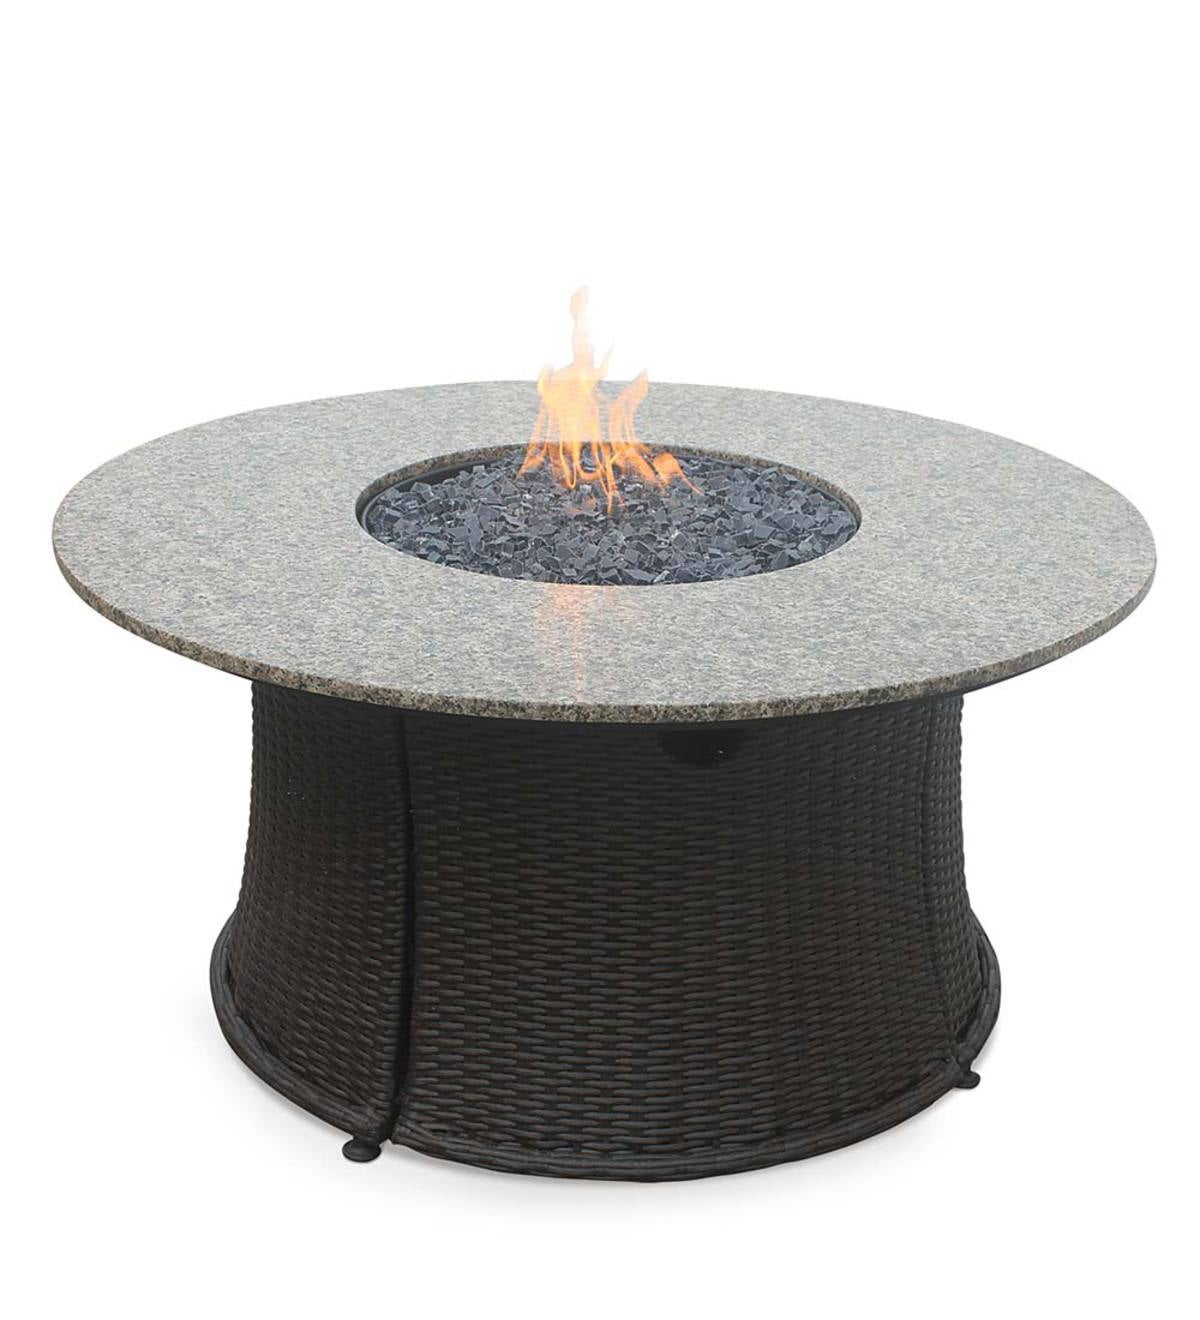 Propane Gas Fire Pit with Granite Top and Wicker Frame